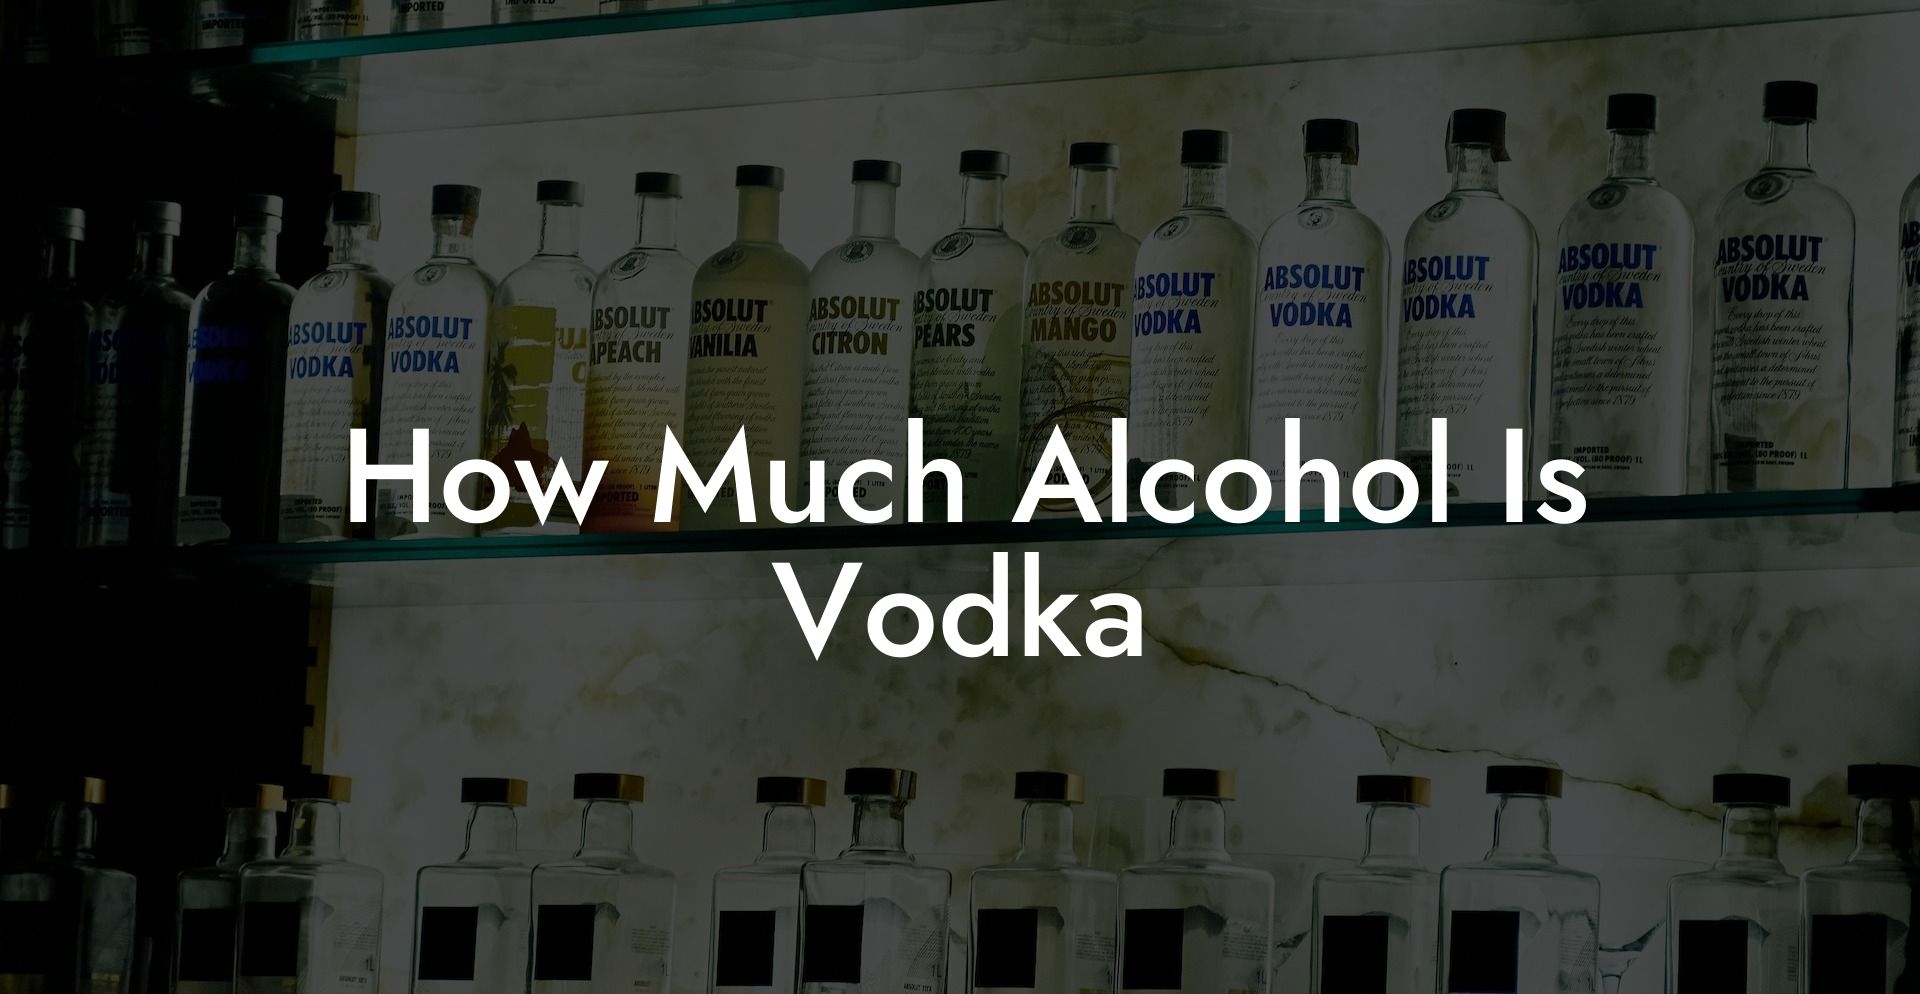 How Much Alcohol Is Vodka